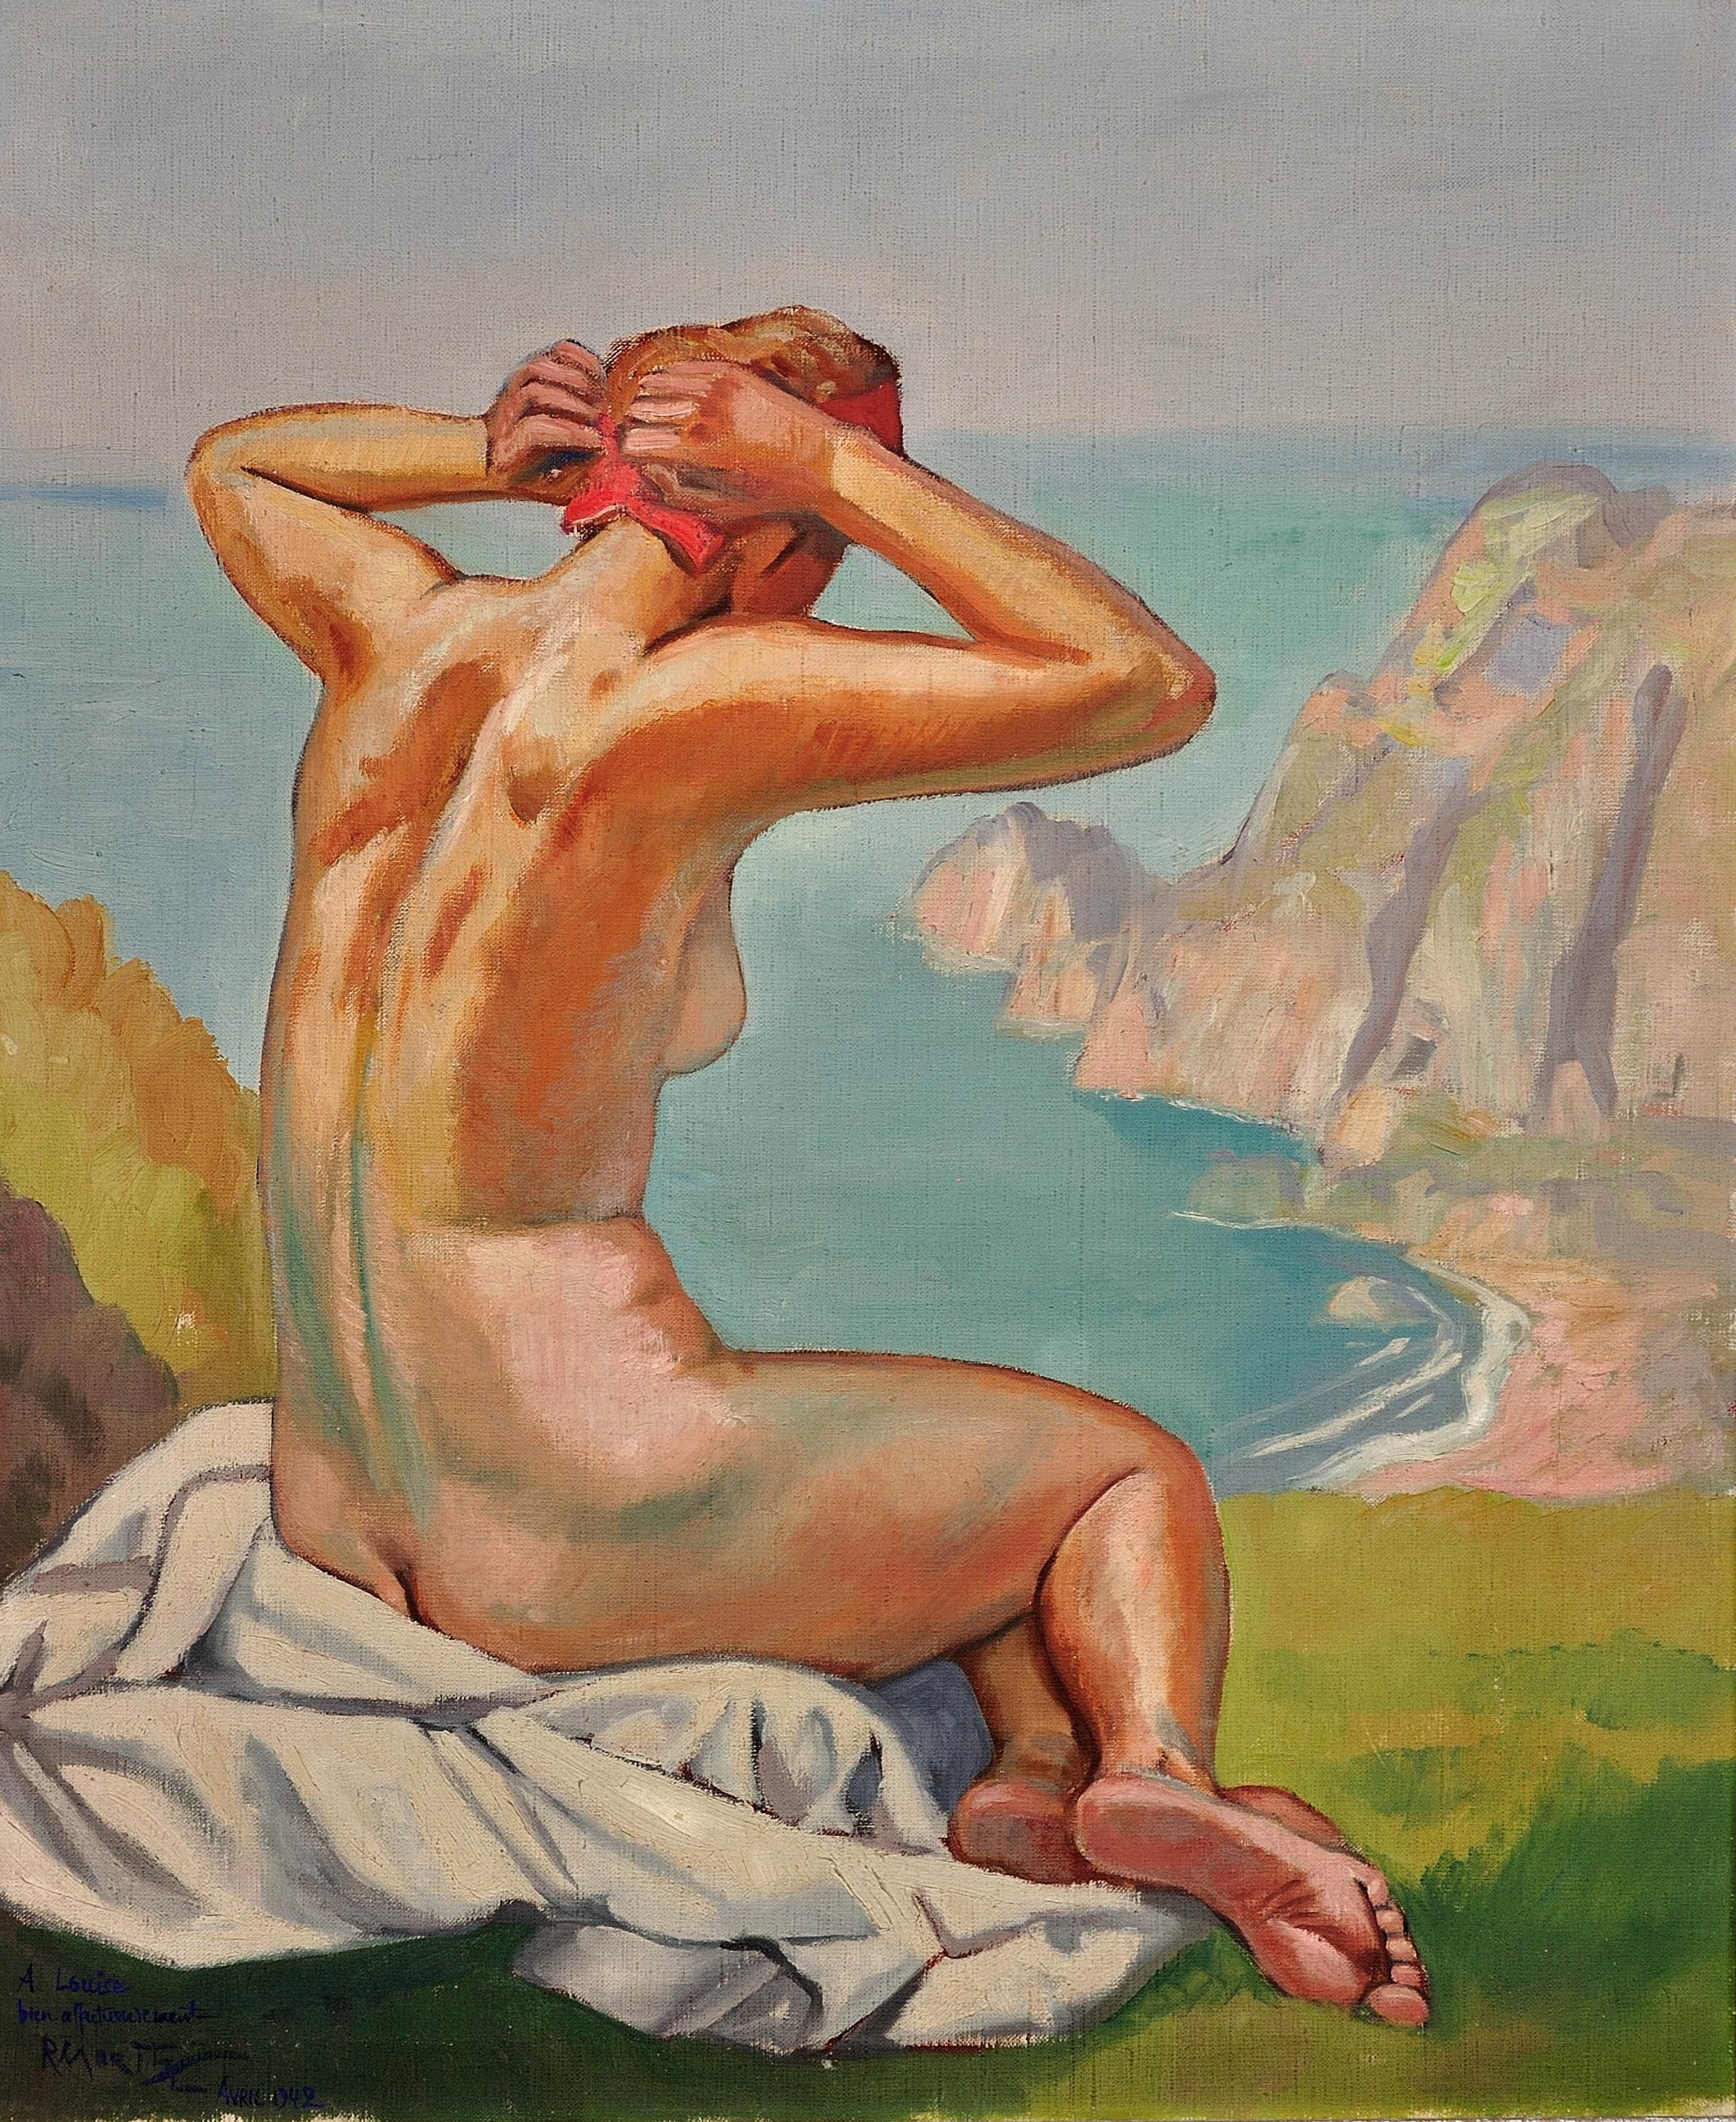 The Lady of the Cliffs, 1927. Nude Clifftop Sunbathing. French Arts Décoratifs. - Painting by Raymond Moritz